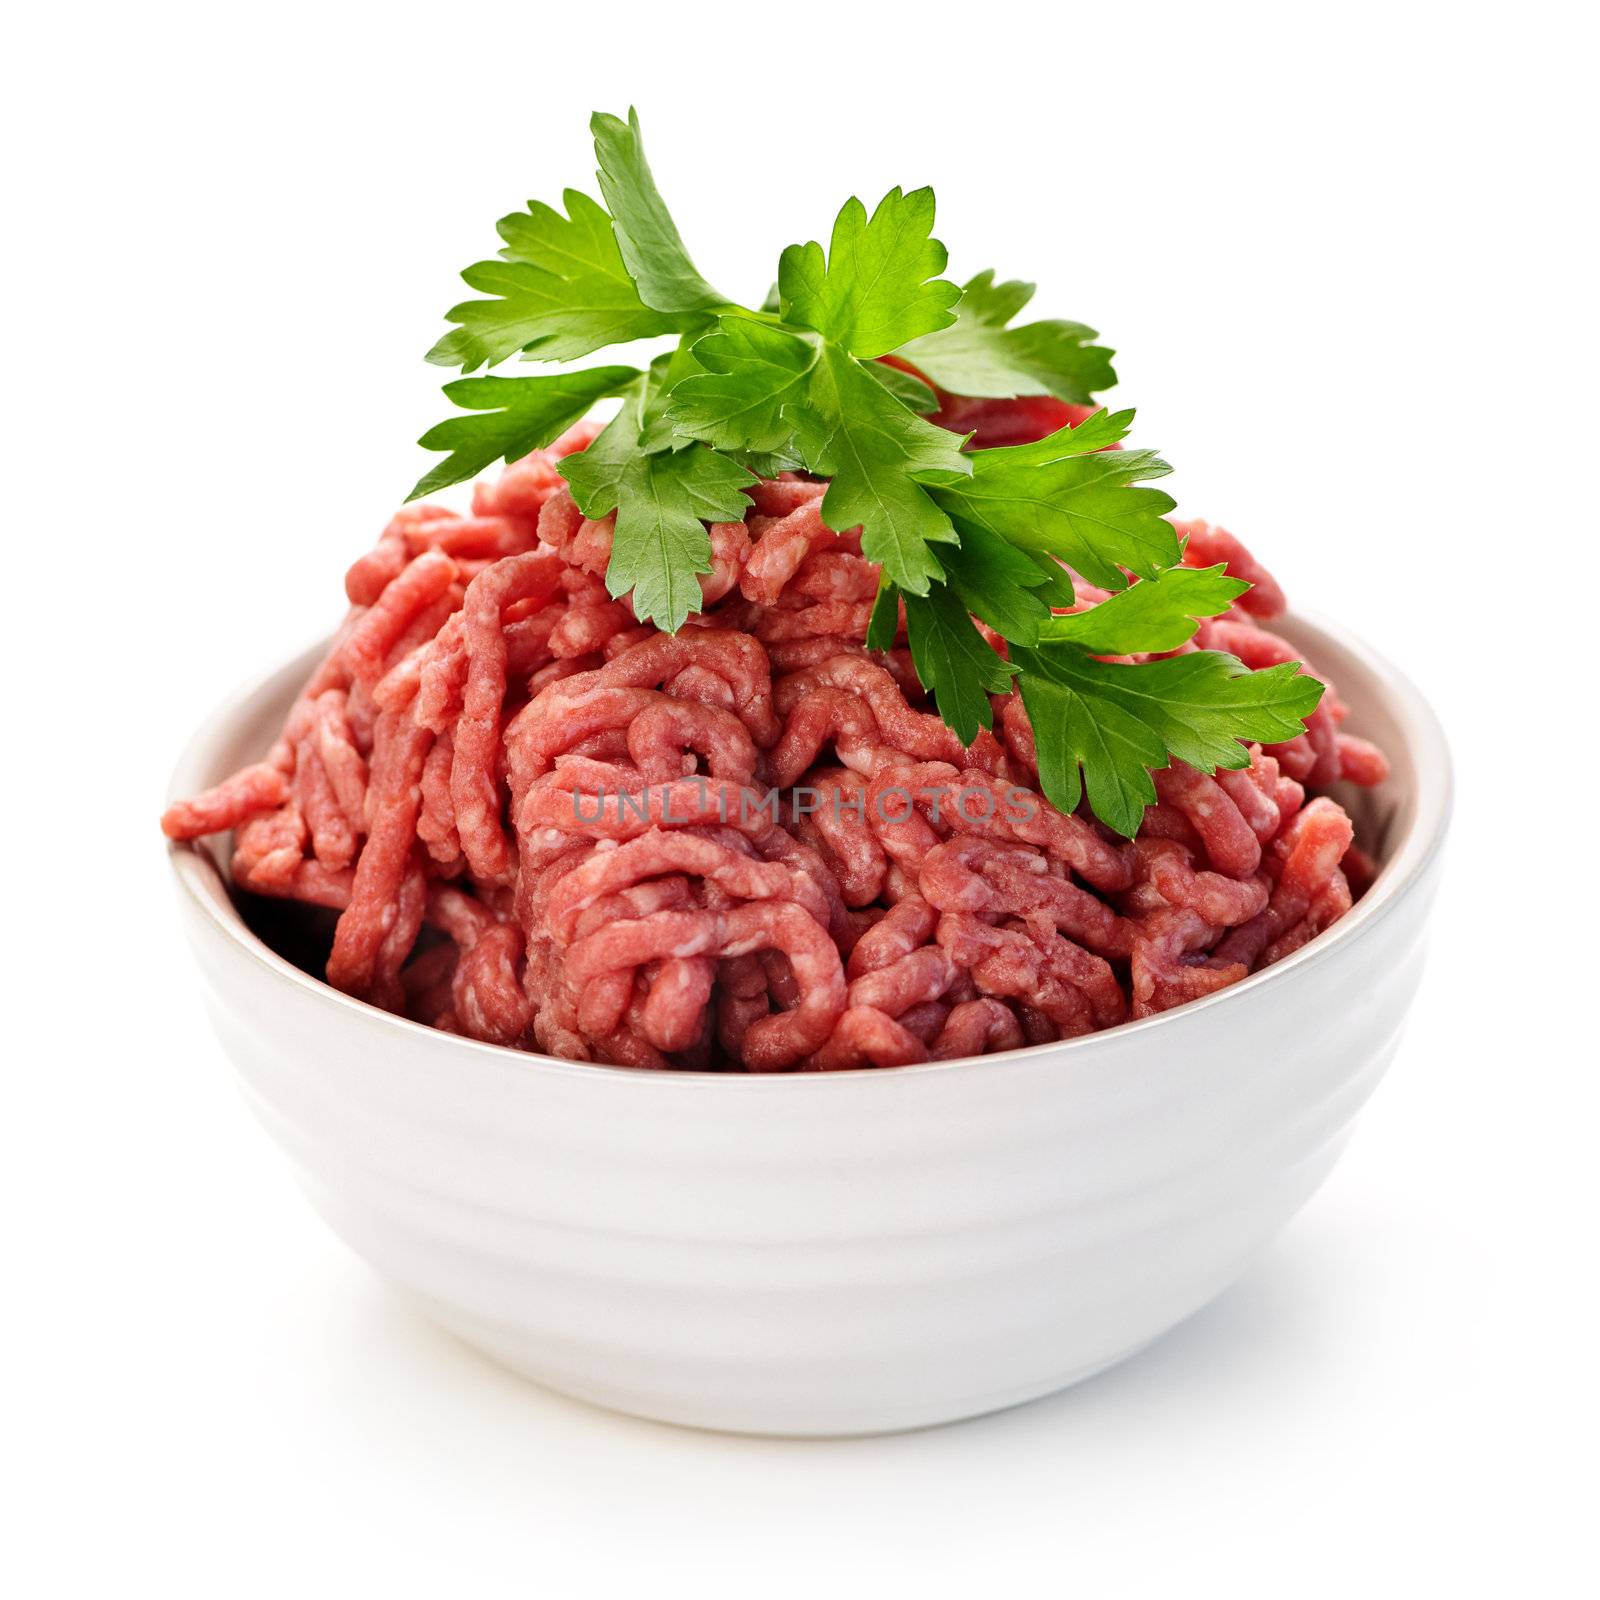 Bowl of raw ground meat by elenathewise